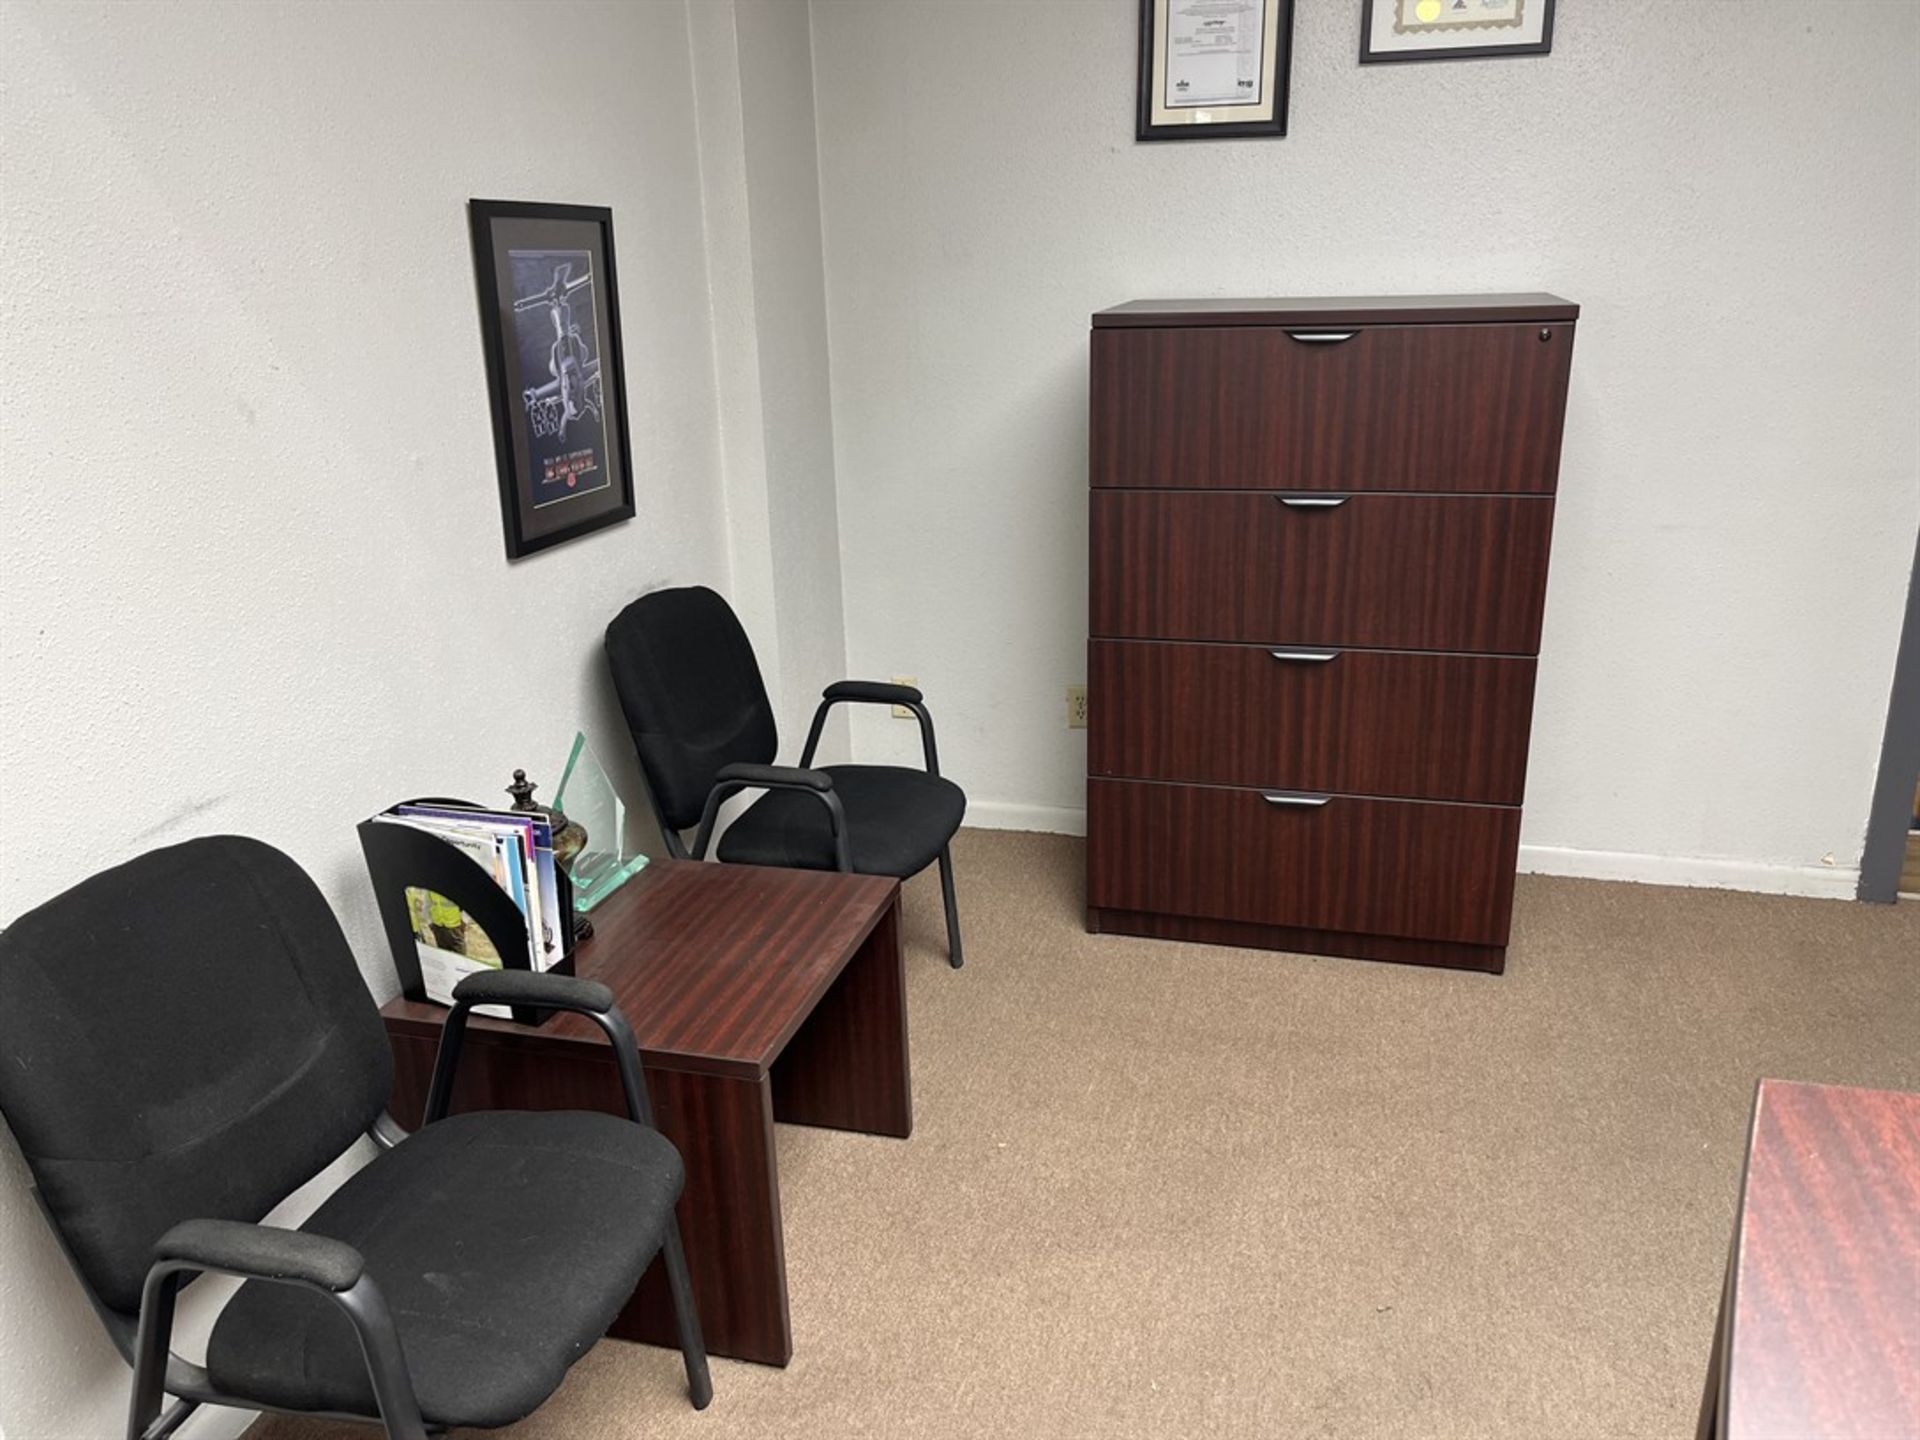 Lot consisting of Reception Desk, Monitors, File Cabinets, and Chair, (PC NOT INCLUDED) - Image 5 of 5